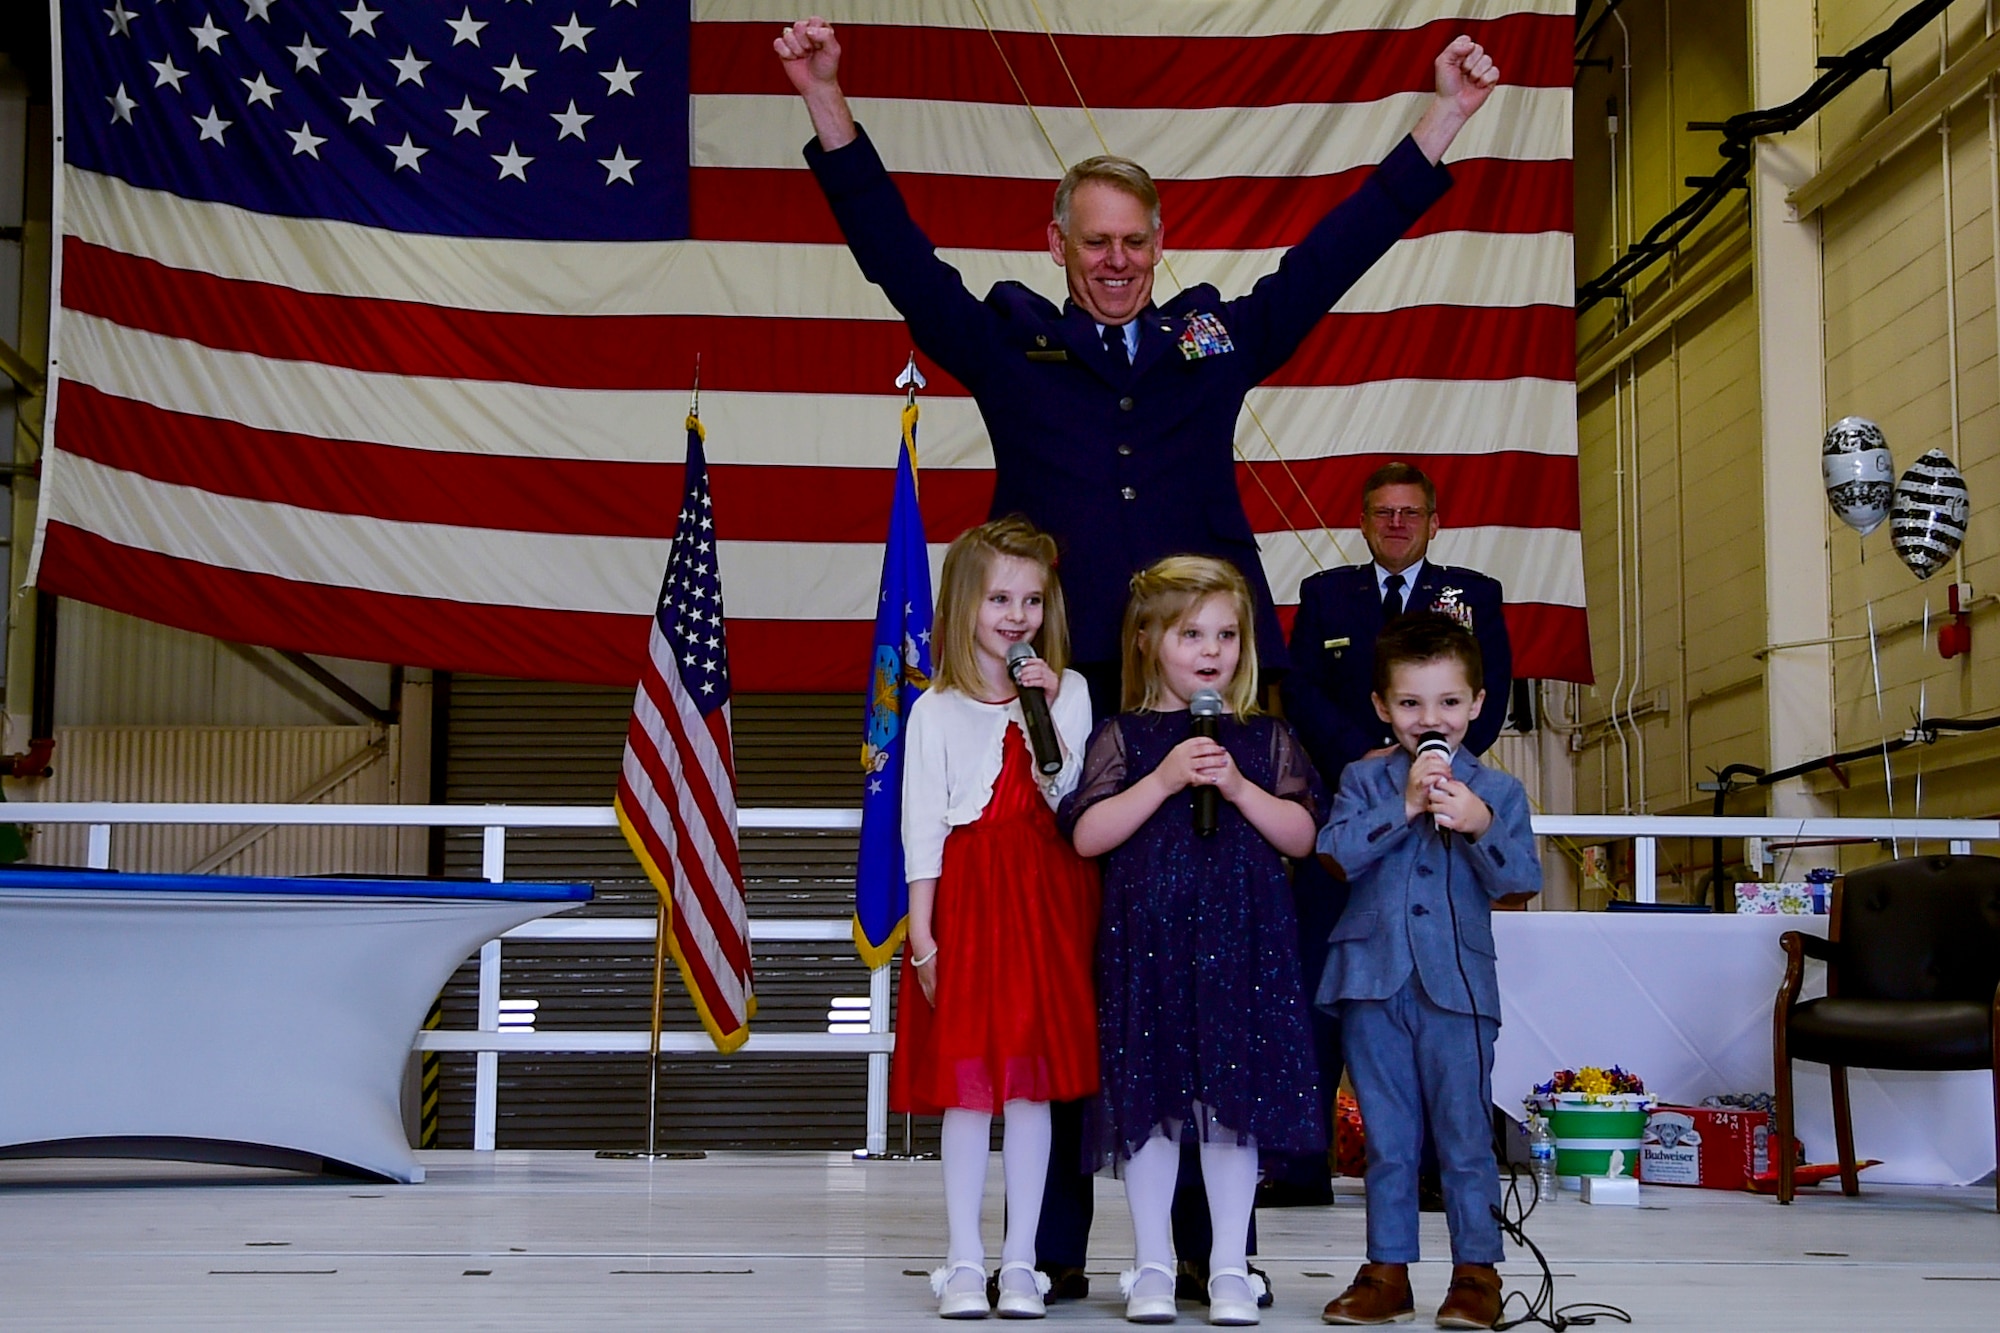 Col. Larry Shaw and his grandchildren sing the Air Force song during his retirement ceremony held at Grissom Air Reserve Base, Ind., March 13, 2021. Shaw retired as the commander of the 434th Air Refueling Wing after serving 33 years in the Air Force as a navigator and pilot. (U.S. Air Force photo by Staff Sgt. Chris Massey)